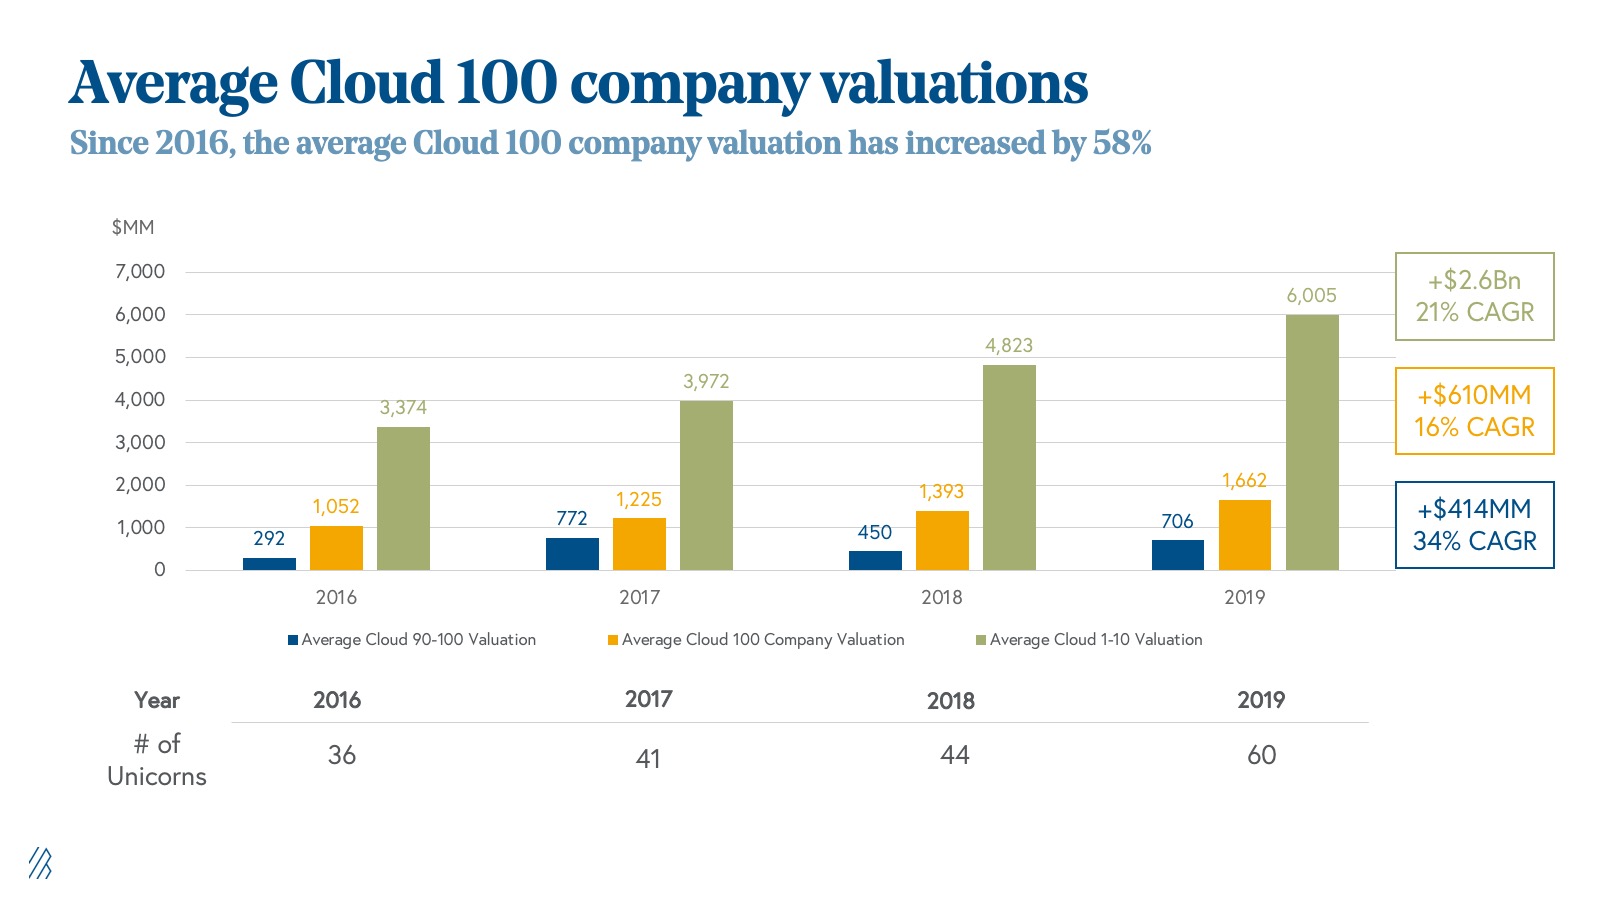 Average Cloud 100 company valuations